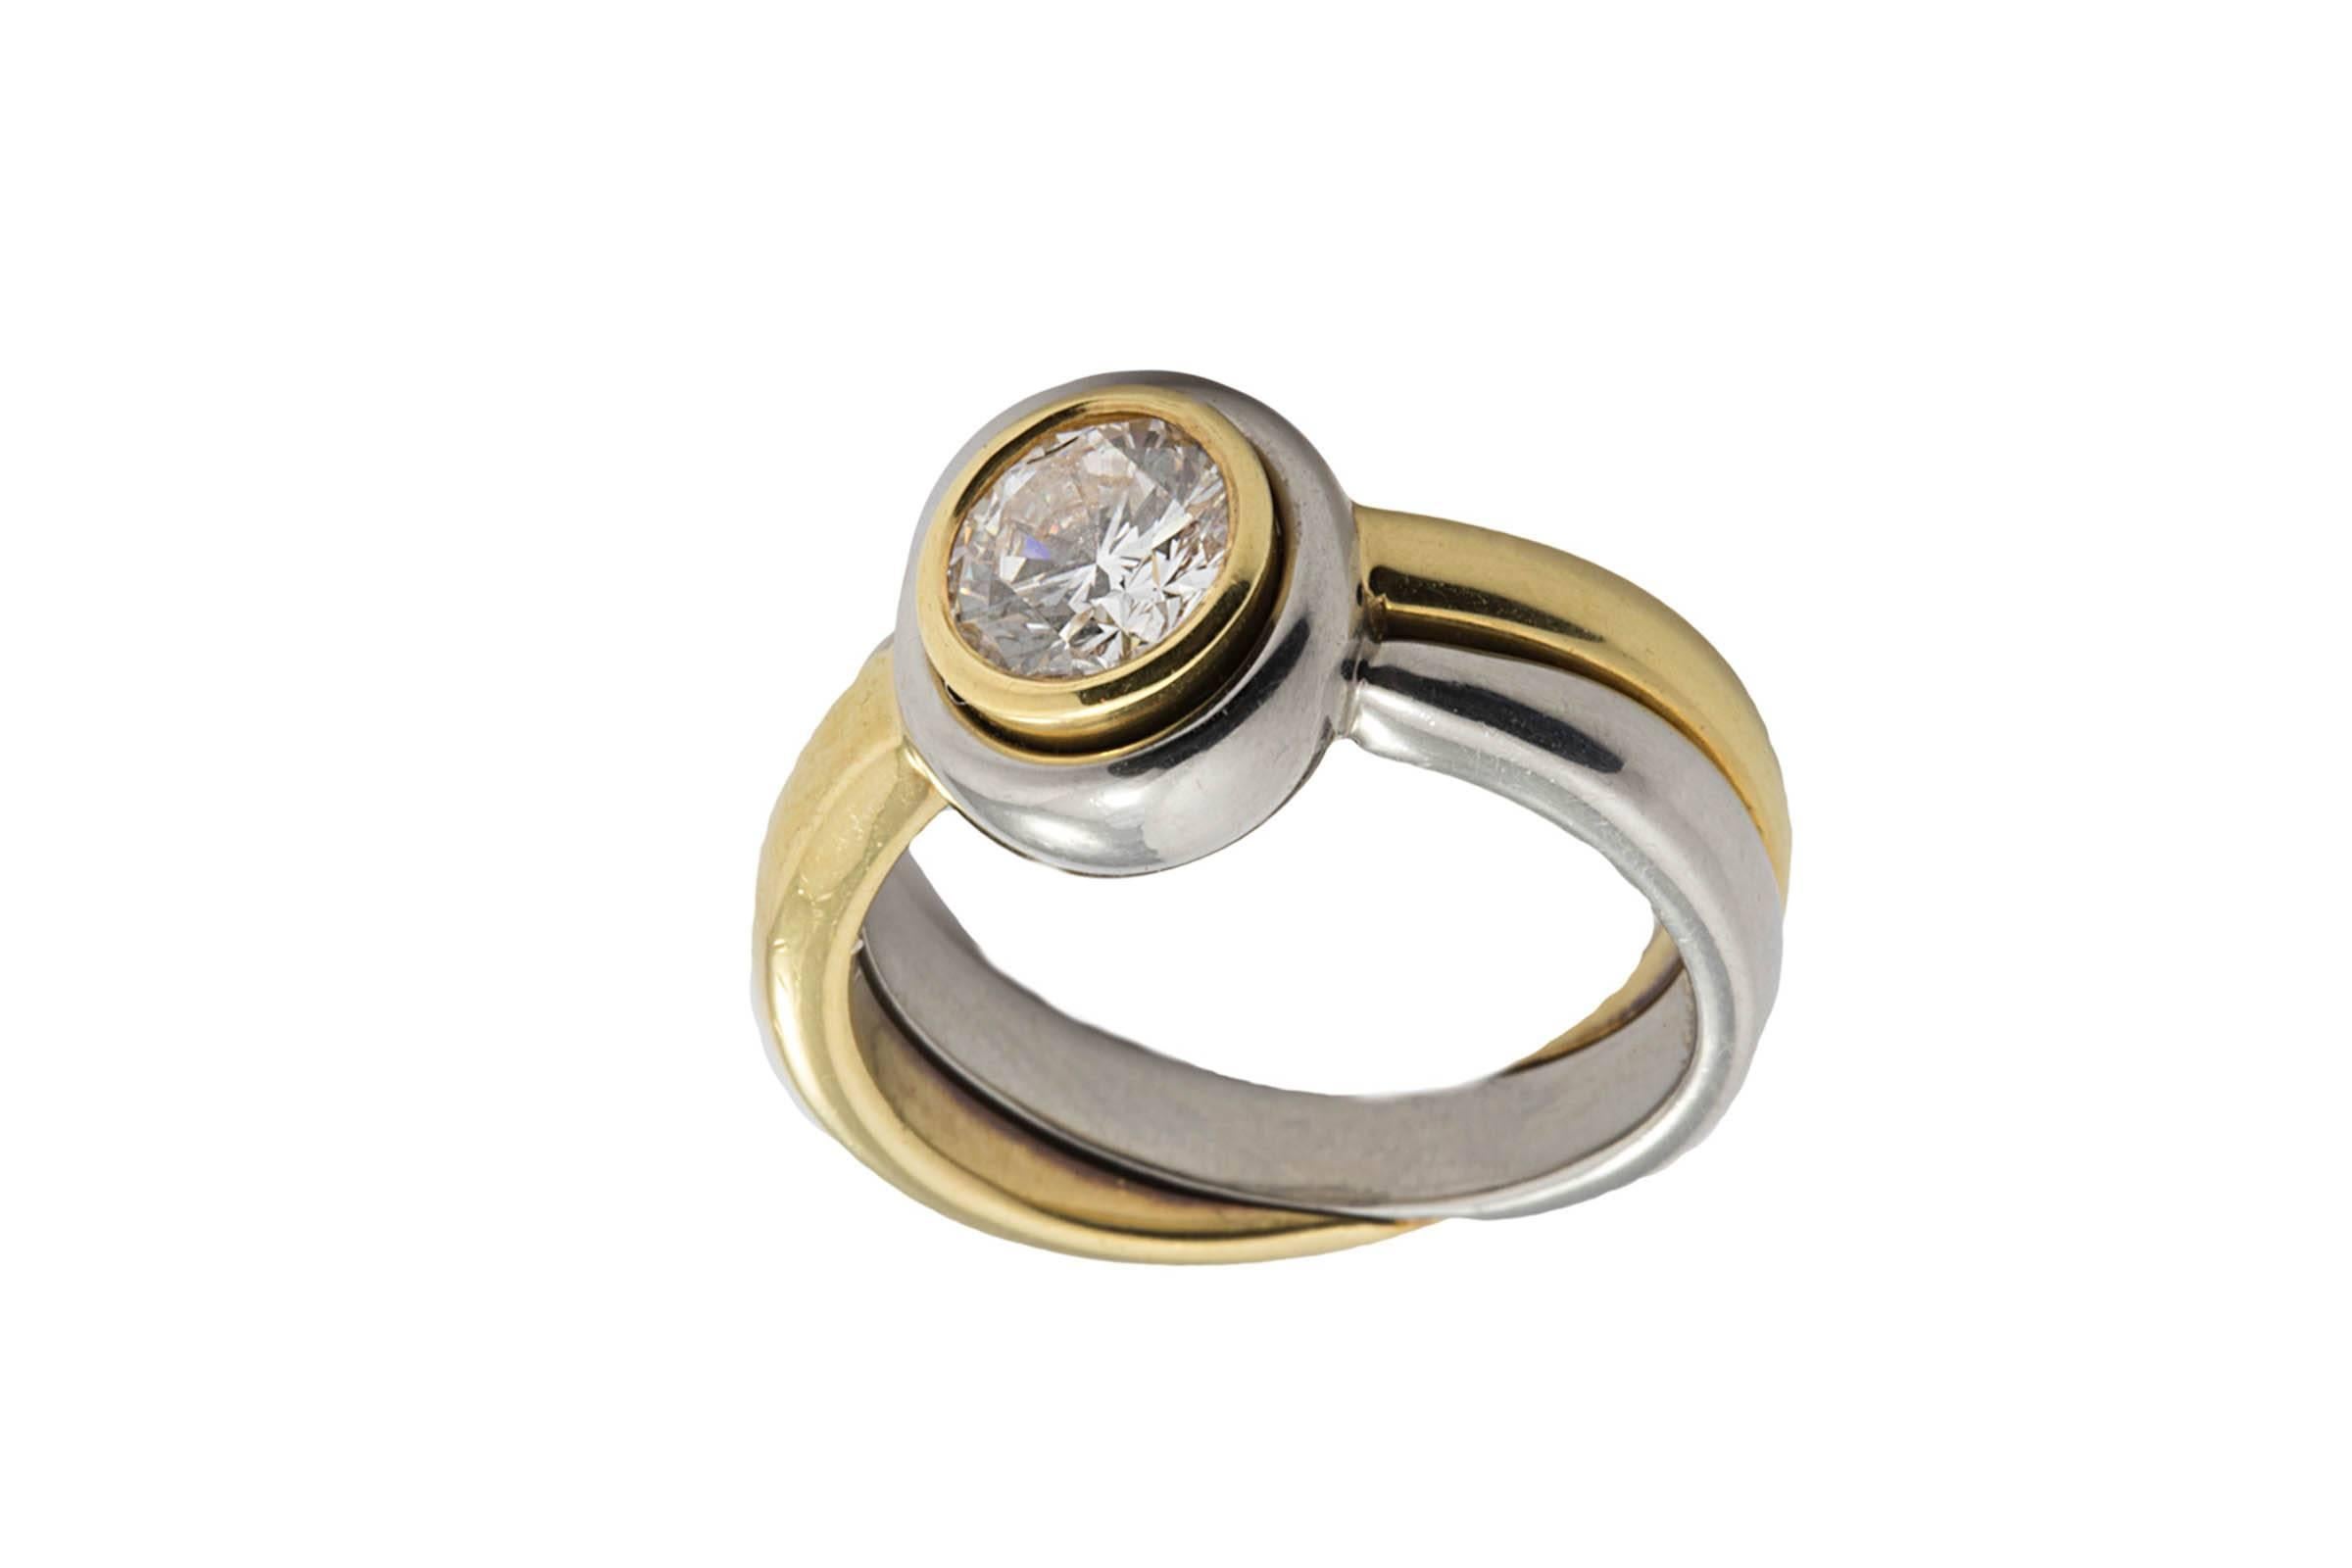 Platinum and 18K gold bezel set diamond ring. The diamond weighs 0.91 carat and G color, SI1 clarity.
This is a very comfortable ring, great for people worried about their diamond 